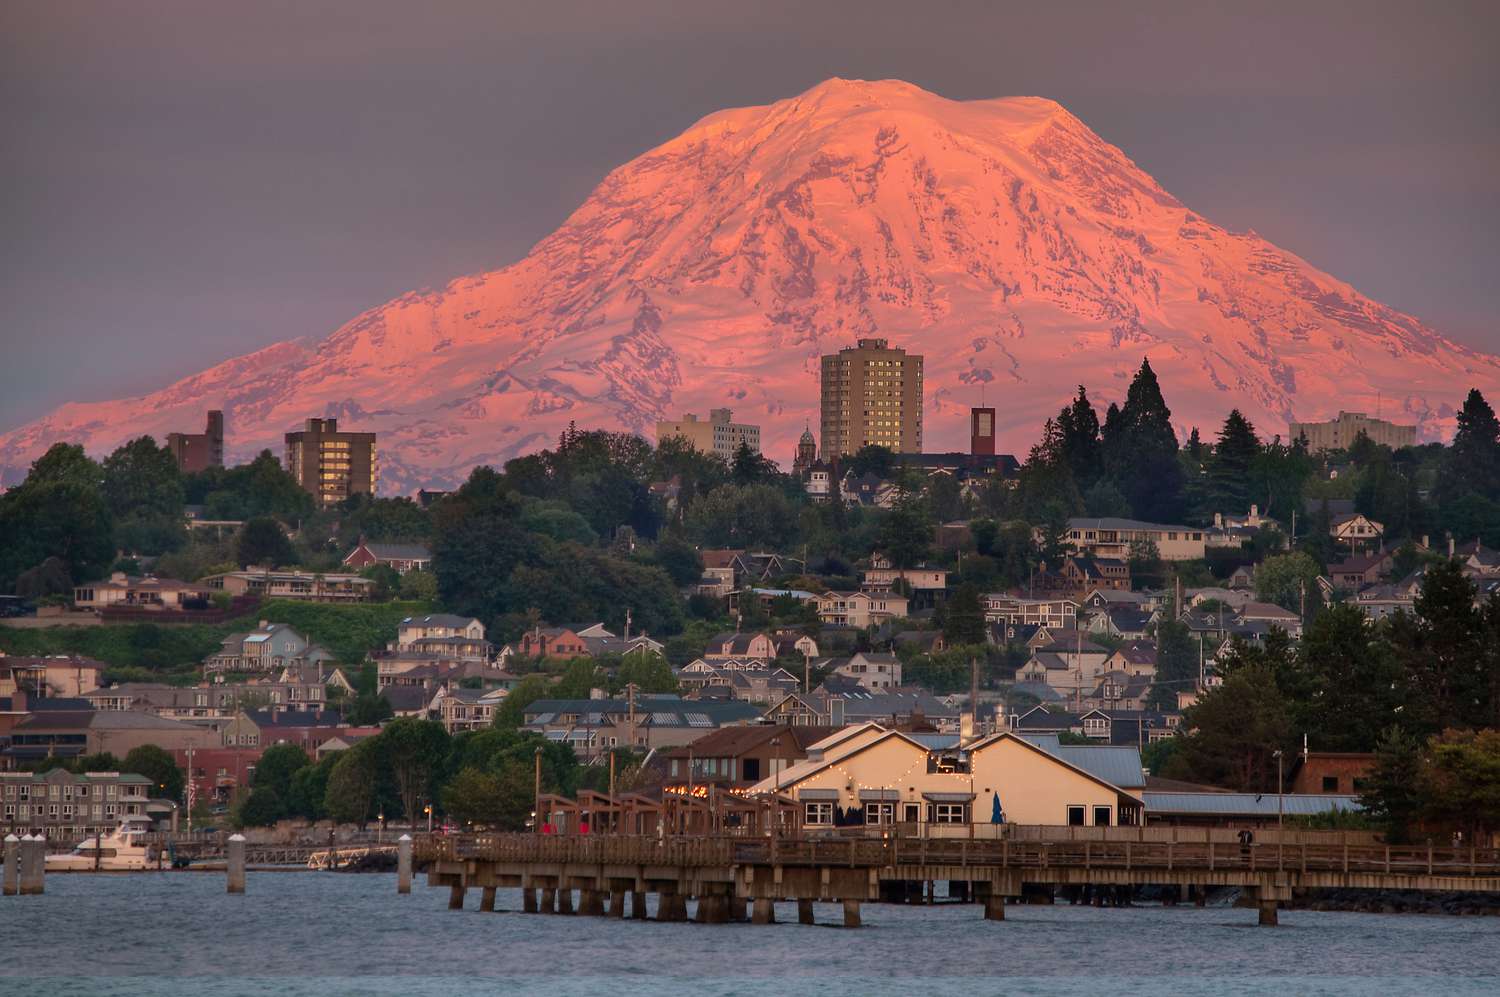 Tacoma & Two More Cities In Washington Ranked Among The Most Fun Cities In The U.S